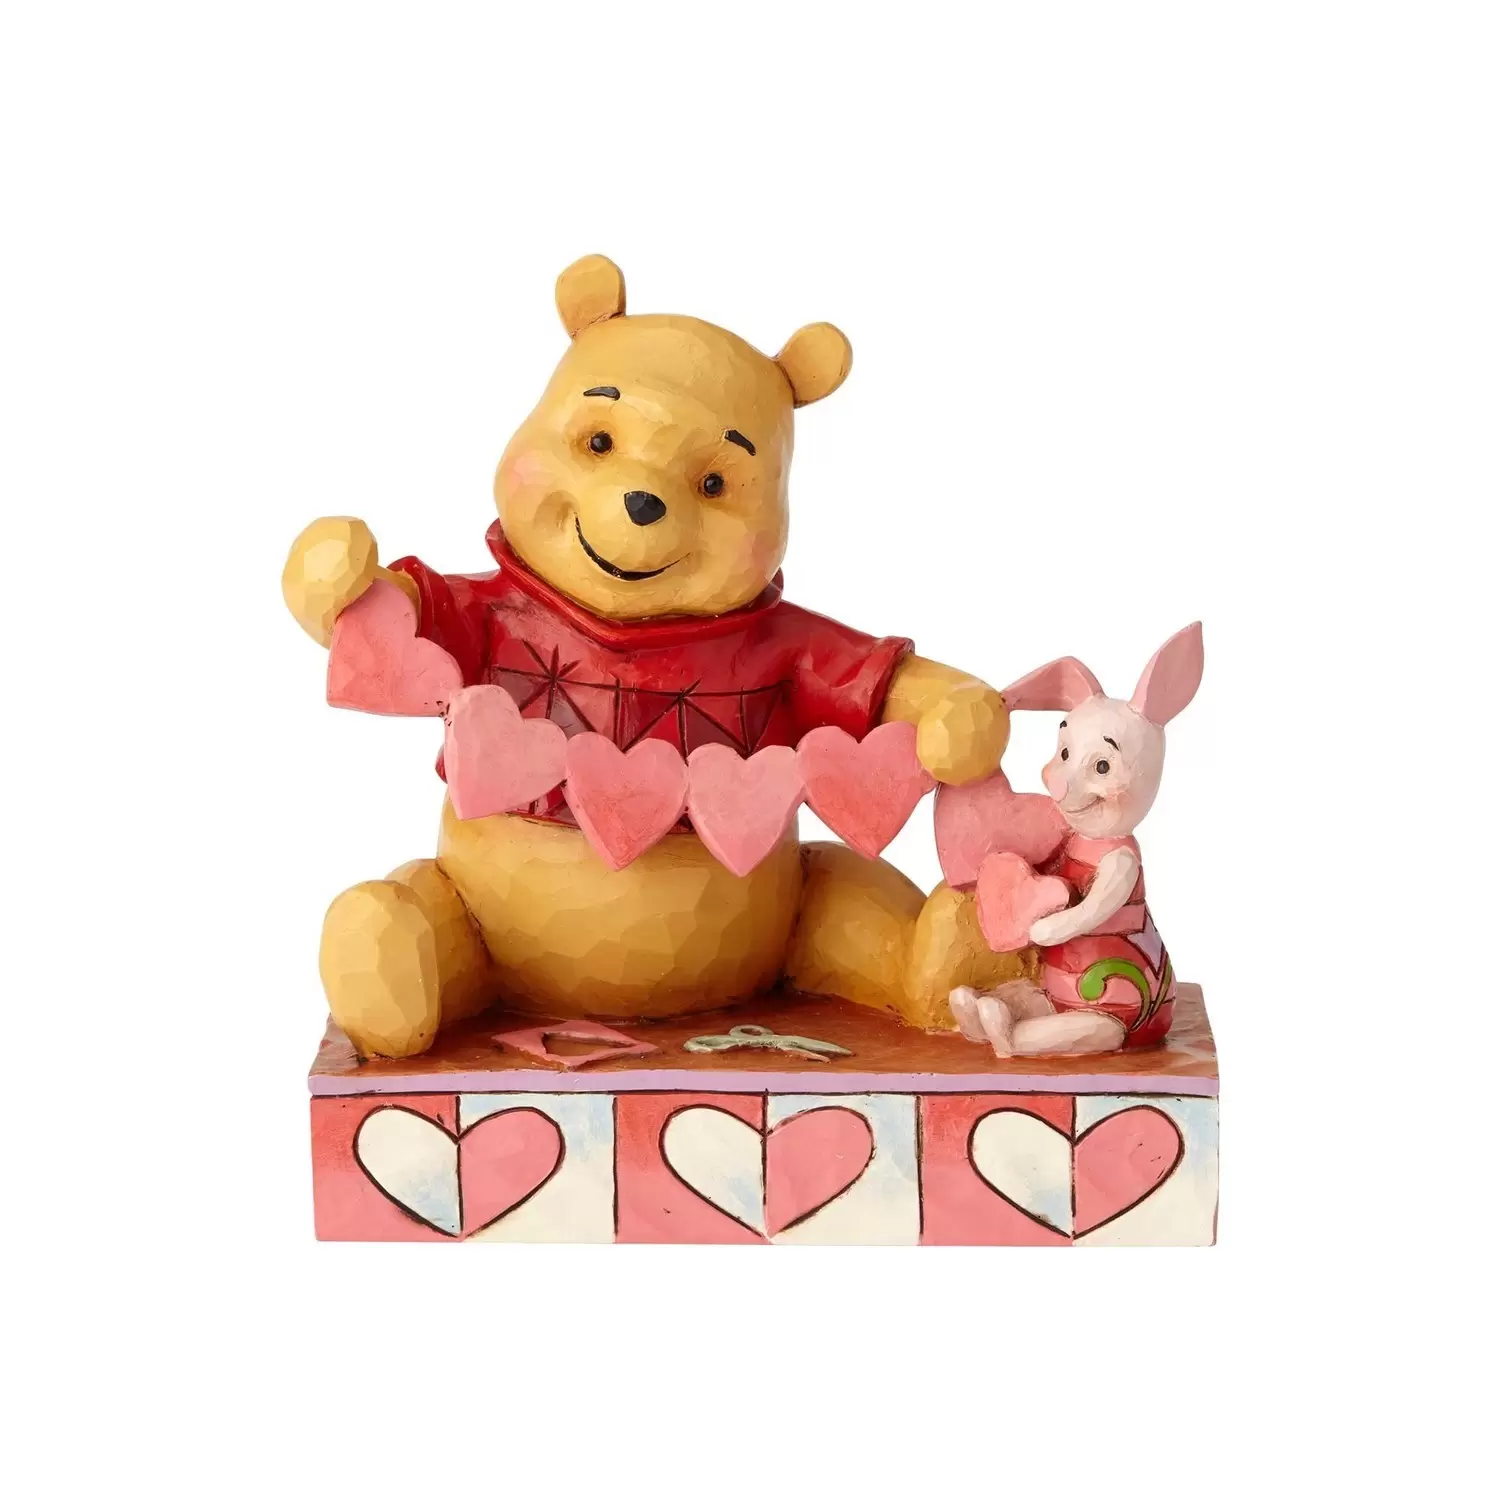 Disney Traditions by Jim Shore - Handmade Valentines - Pooh and Piglet Heart Valentine